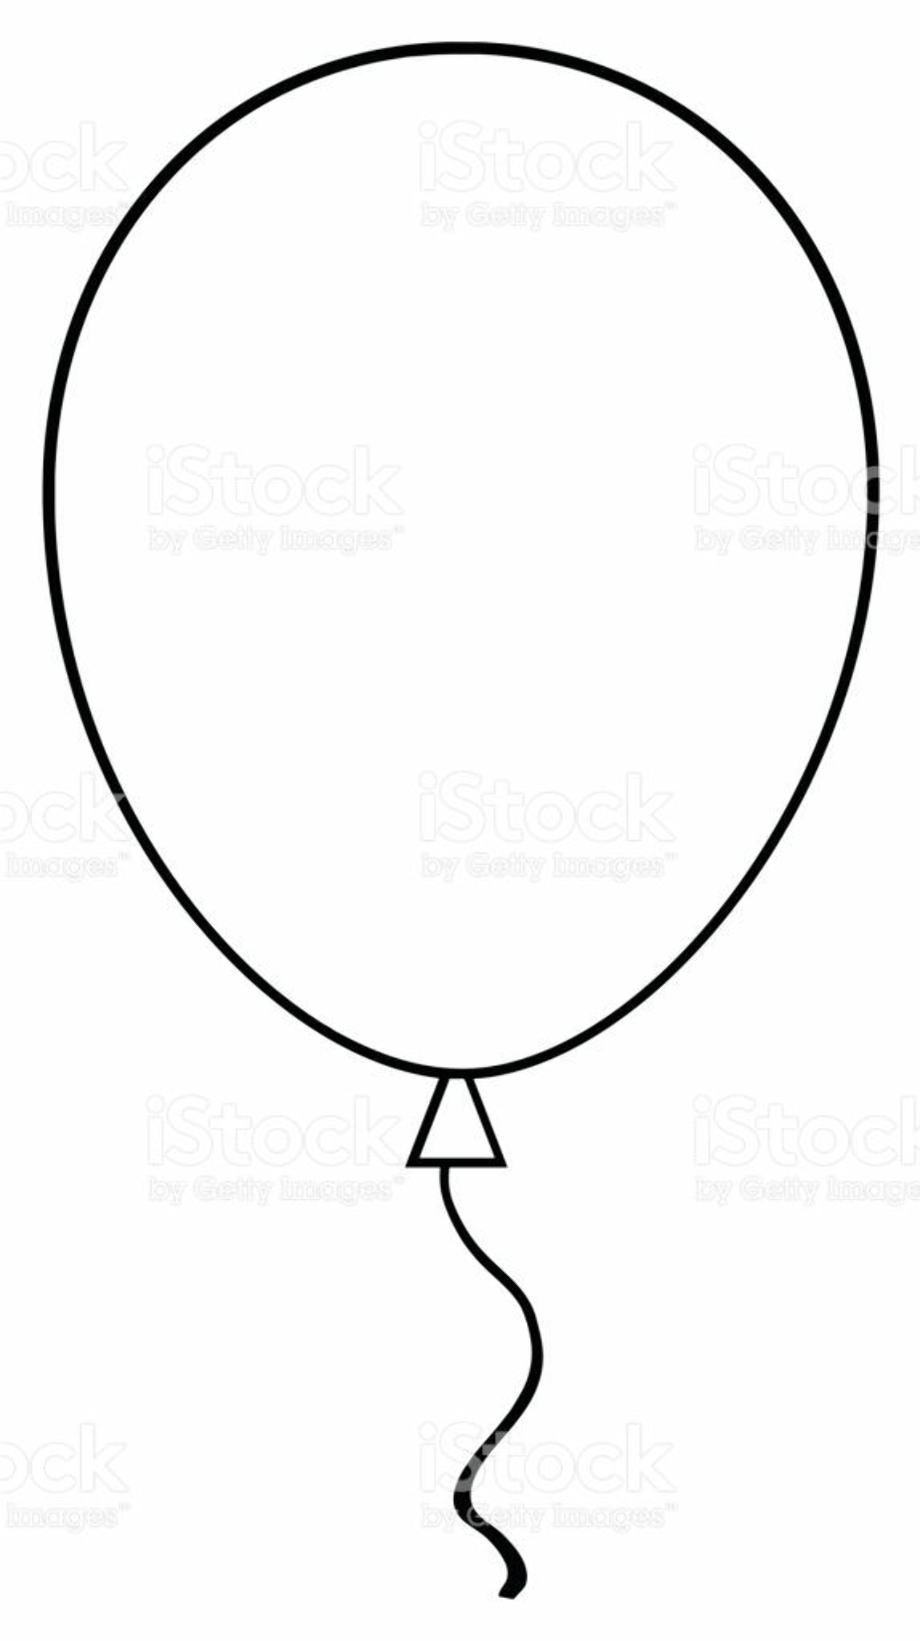 balloon clipart black and white